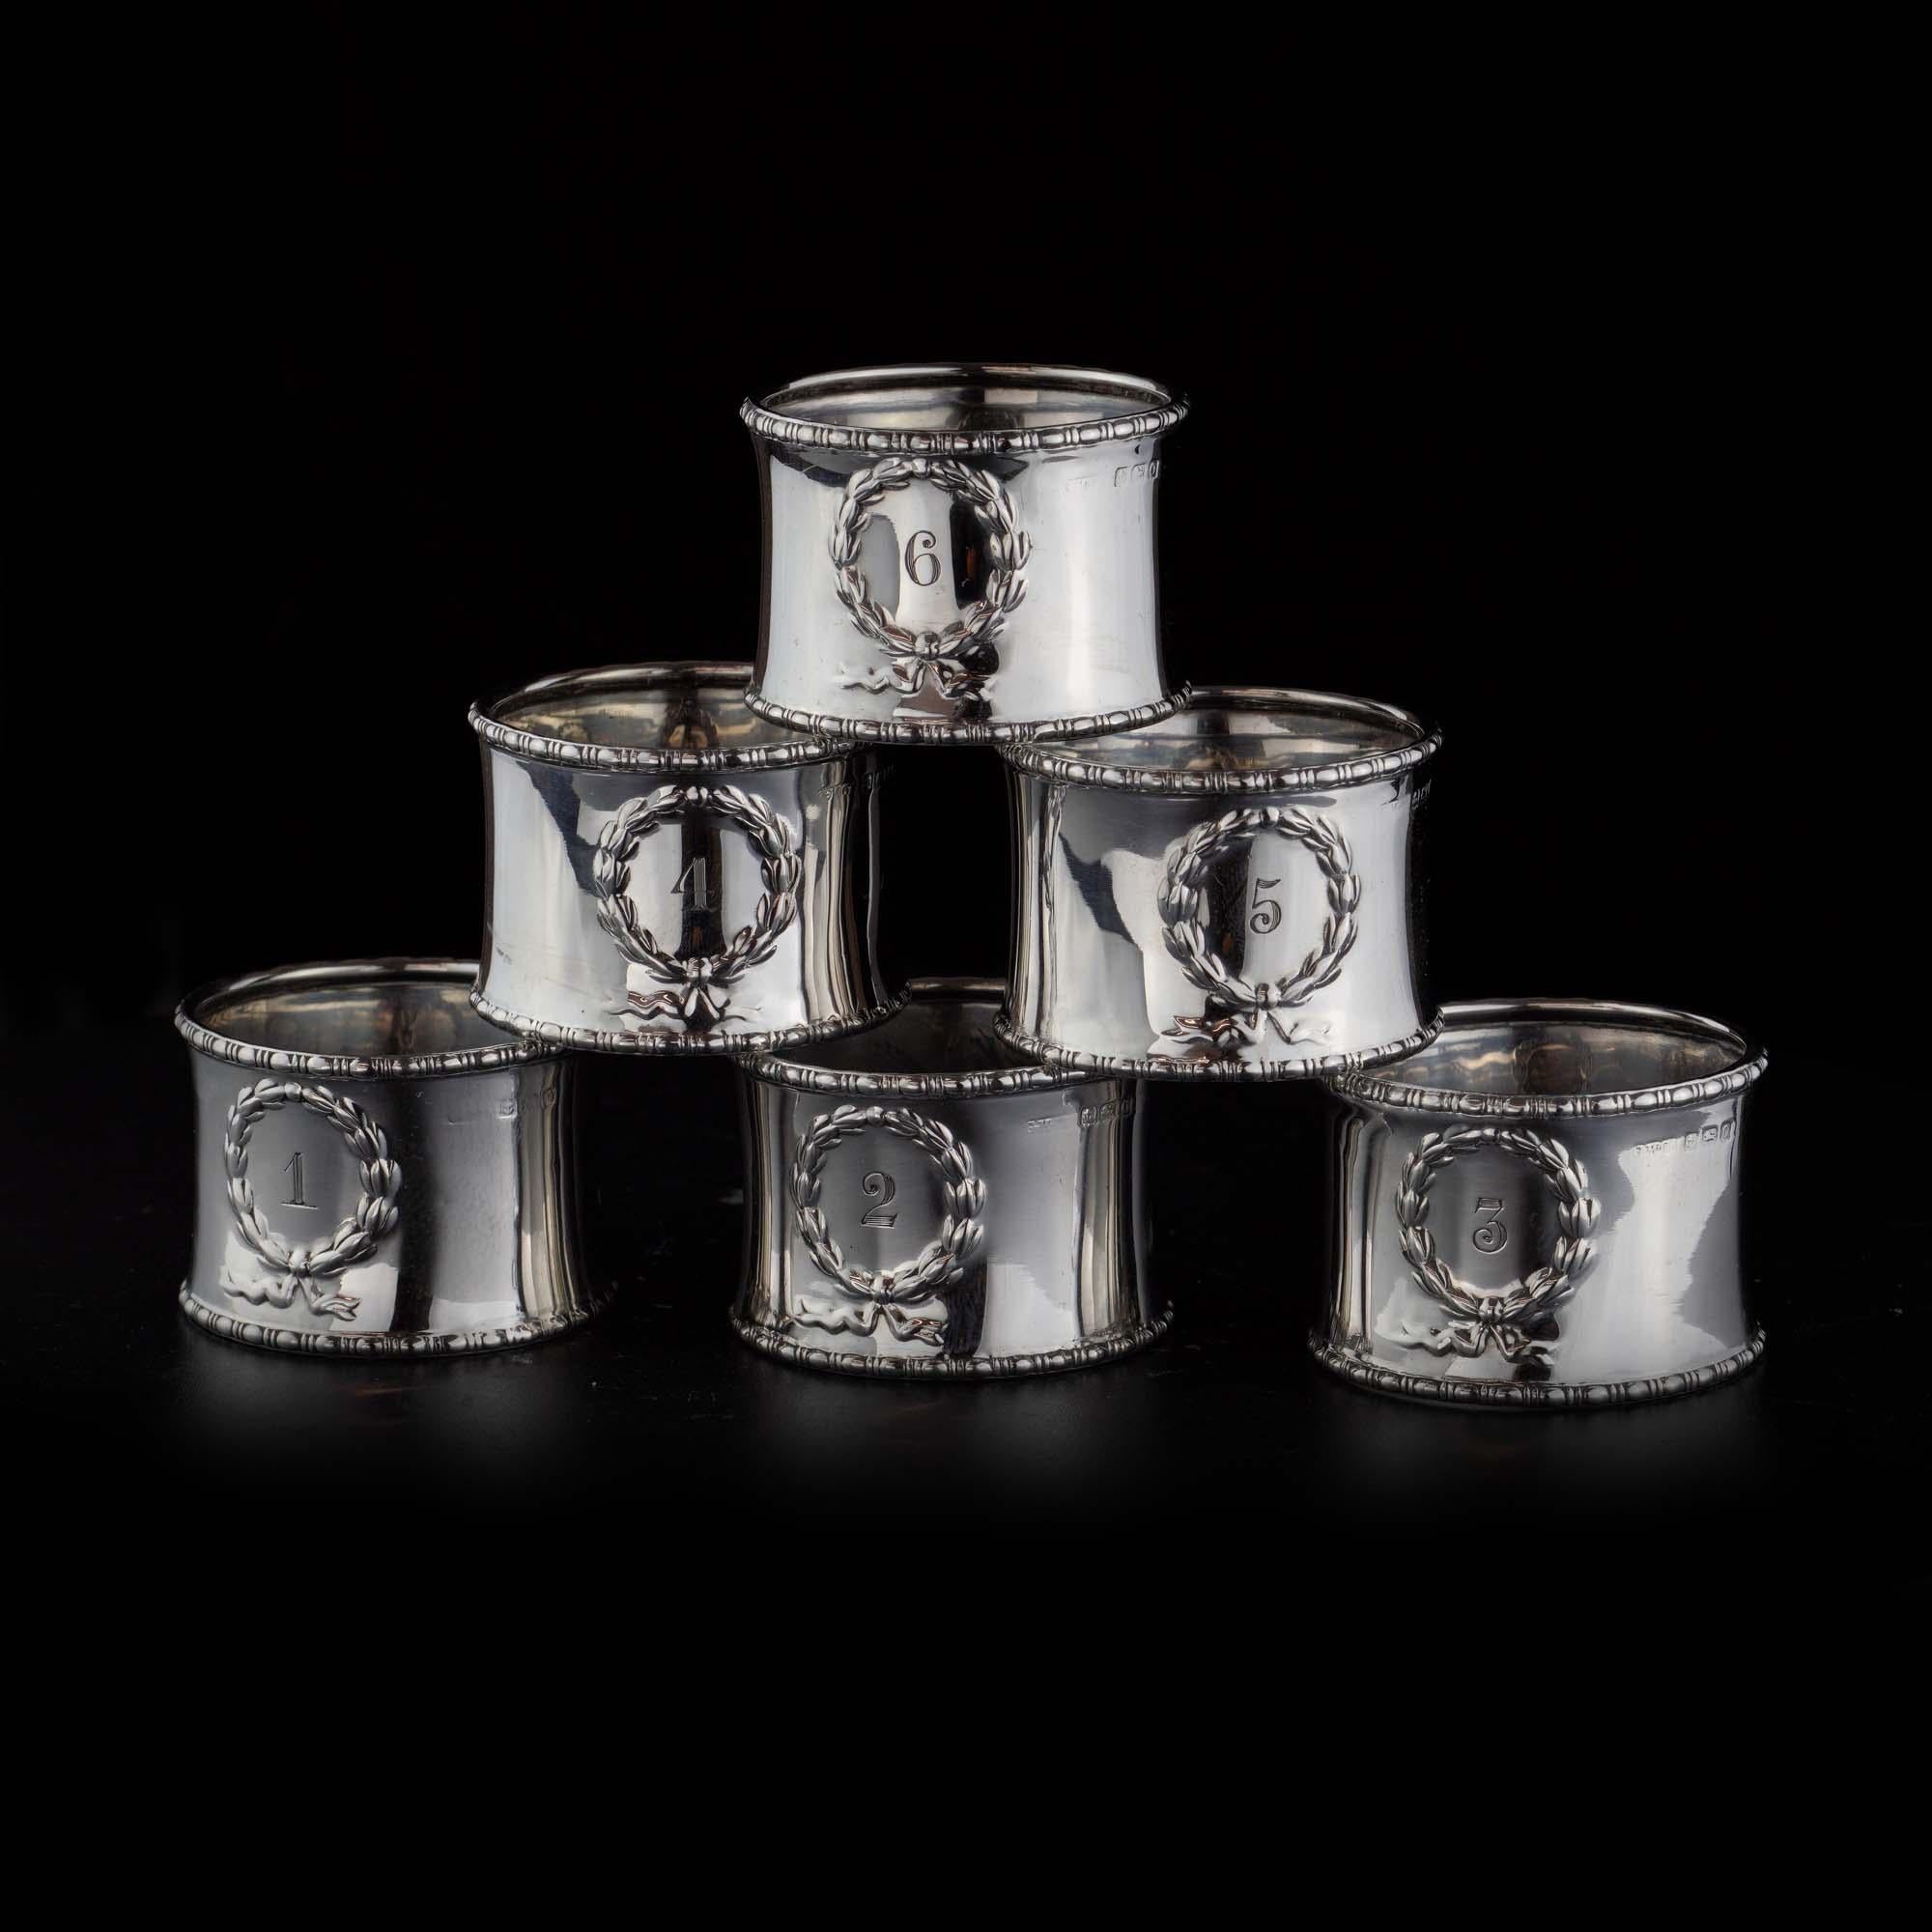 Antique sterling silver set of 6 napkin rings, decorated and engraved with wreaths and ribbons, with numbers at the centre from 1 to 6. 

They're not just for decoration! These are the perfect way to keep your tablecloth from slipping off of the